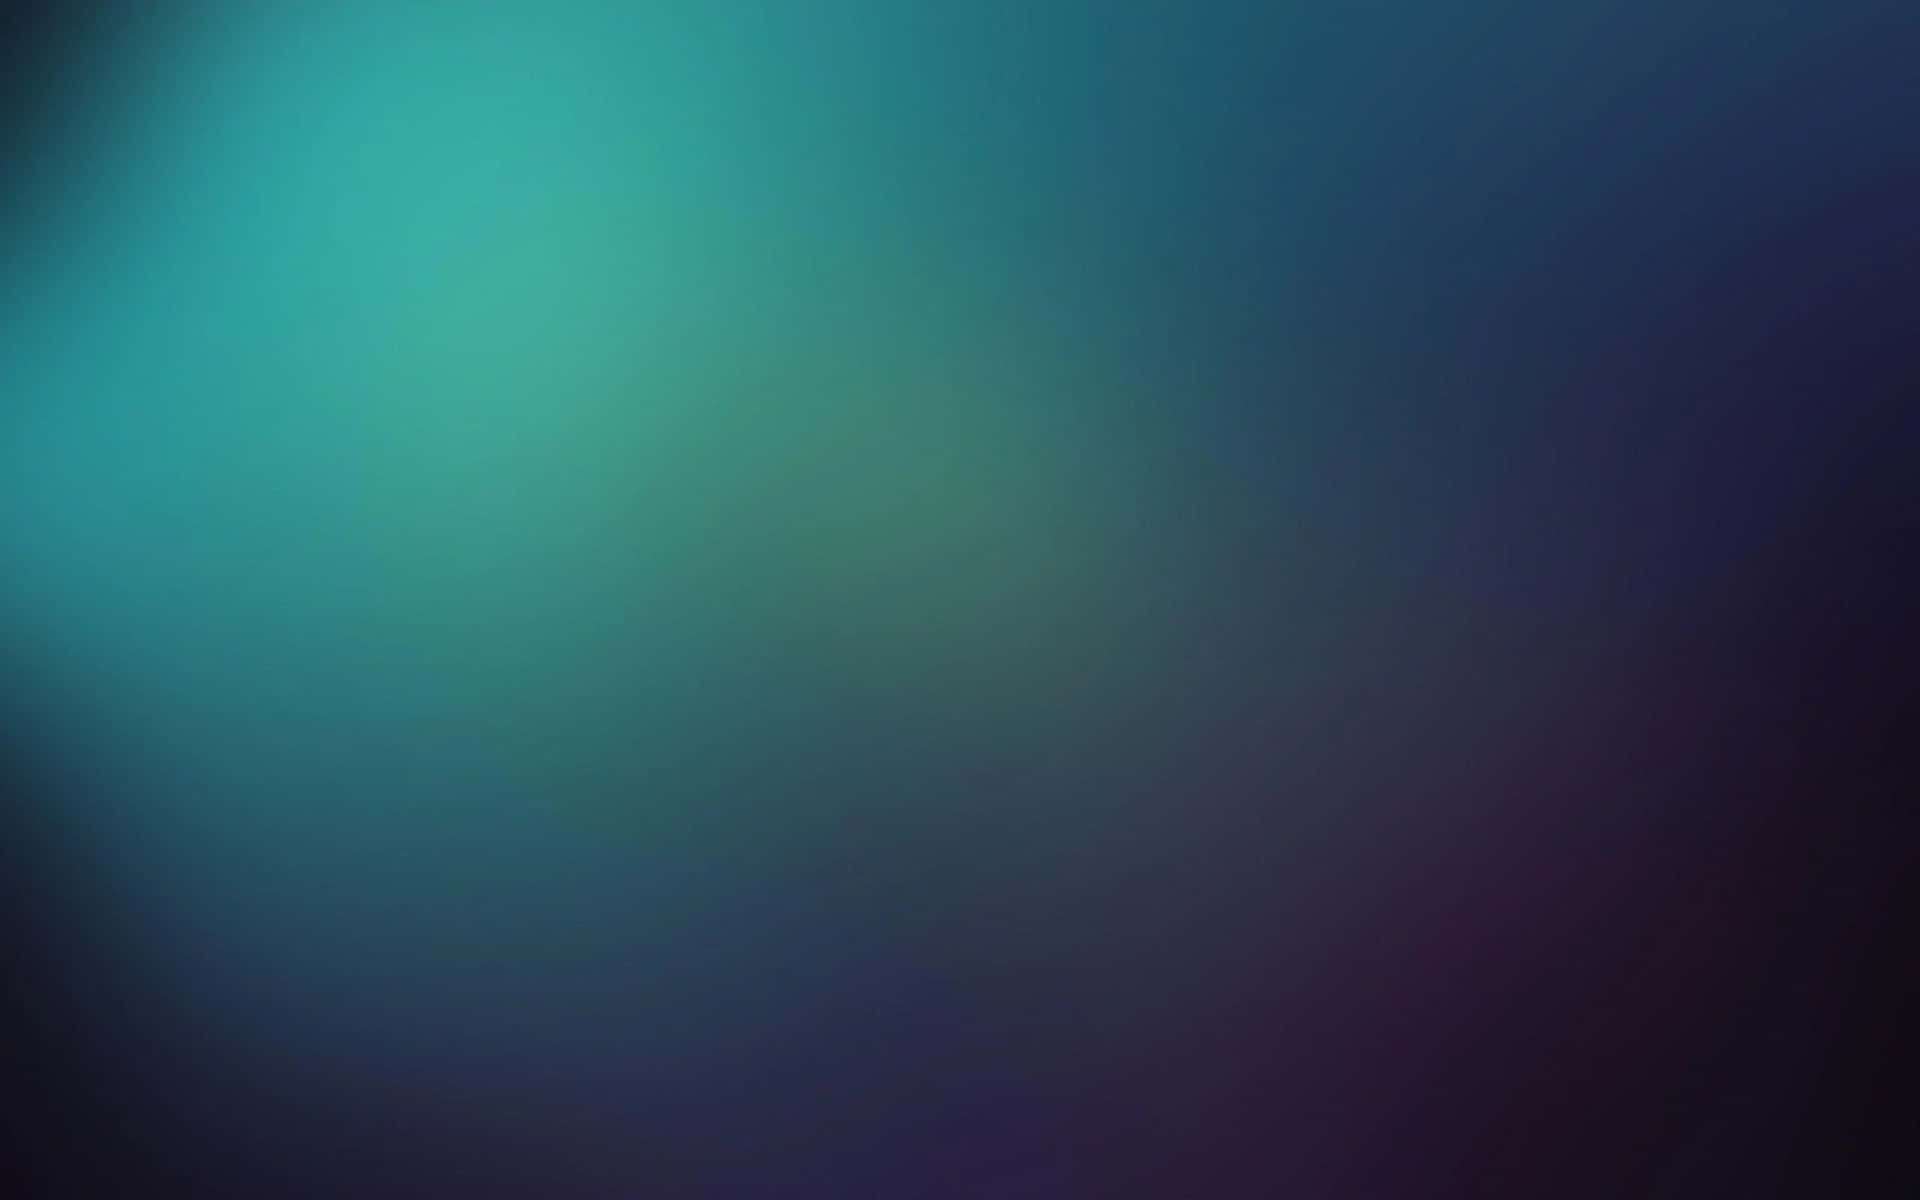 A gradient blue abstract background.